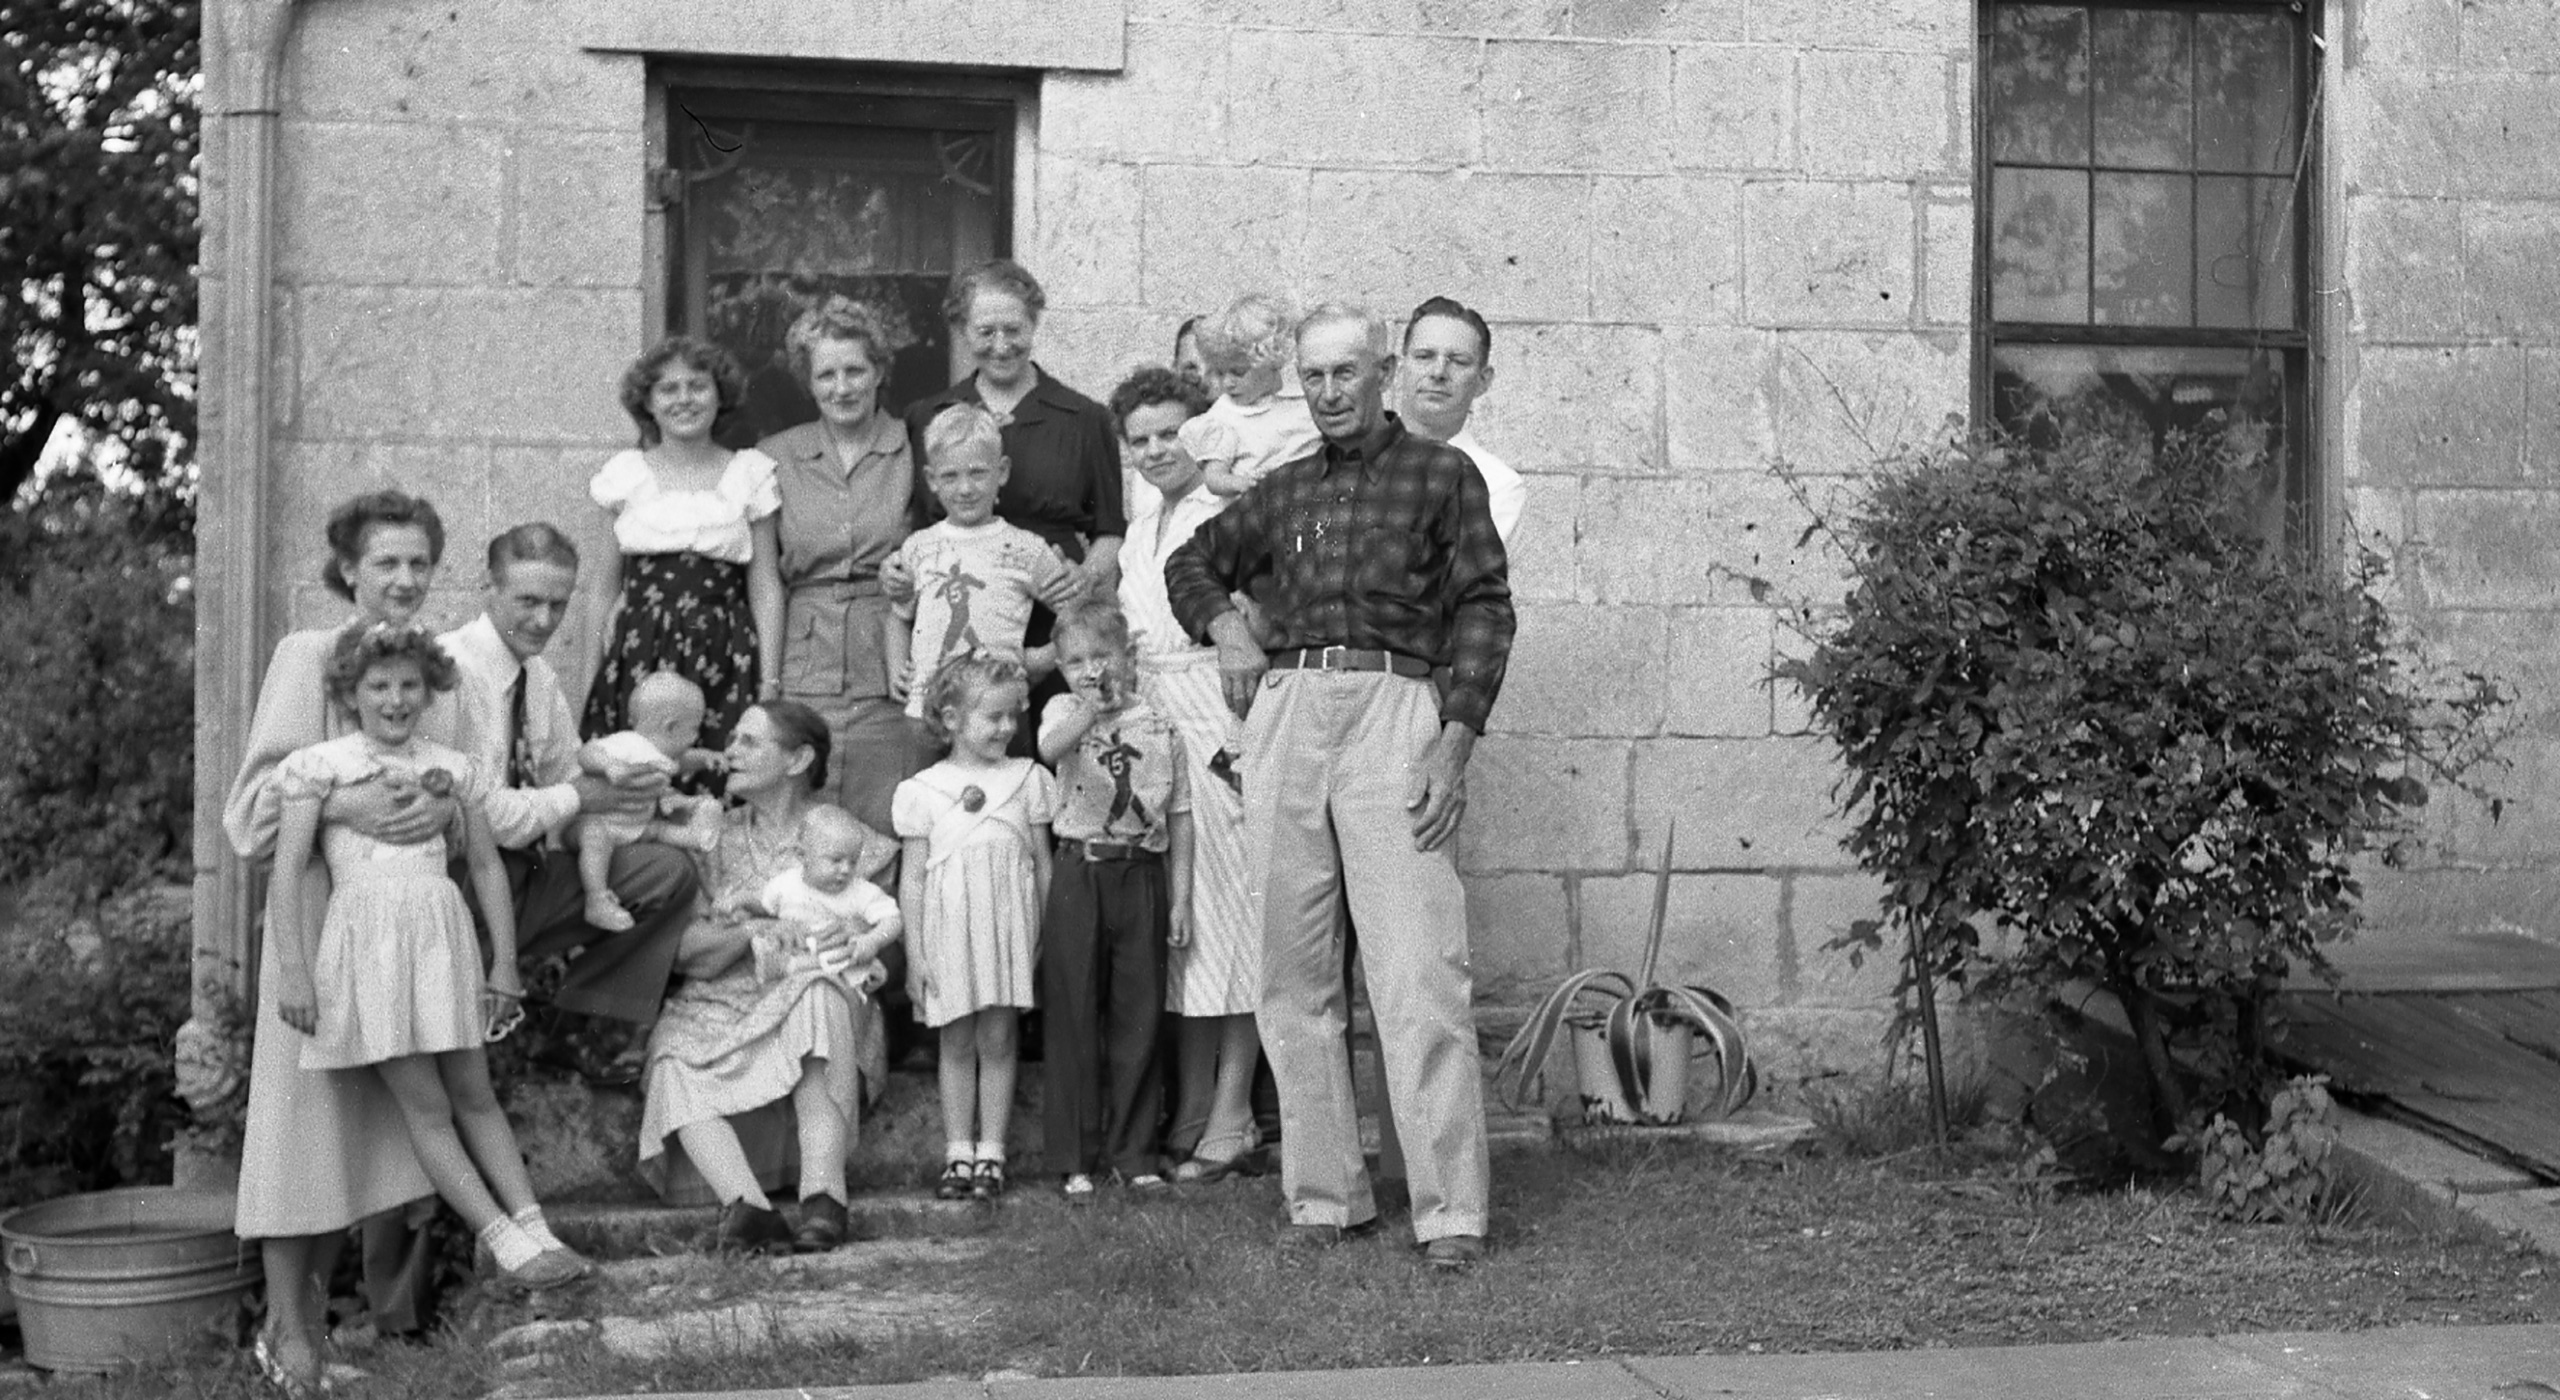 Edwards Family, late 40's